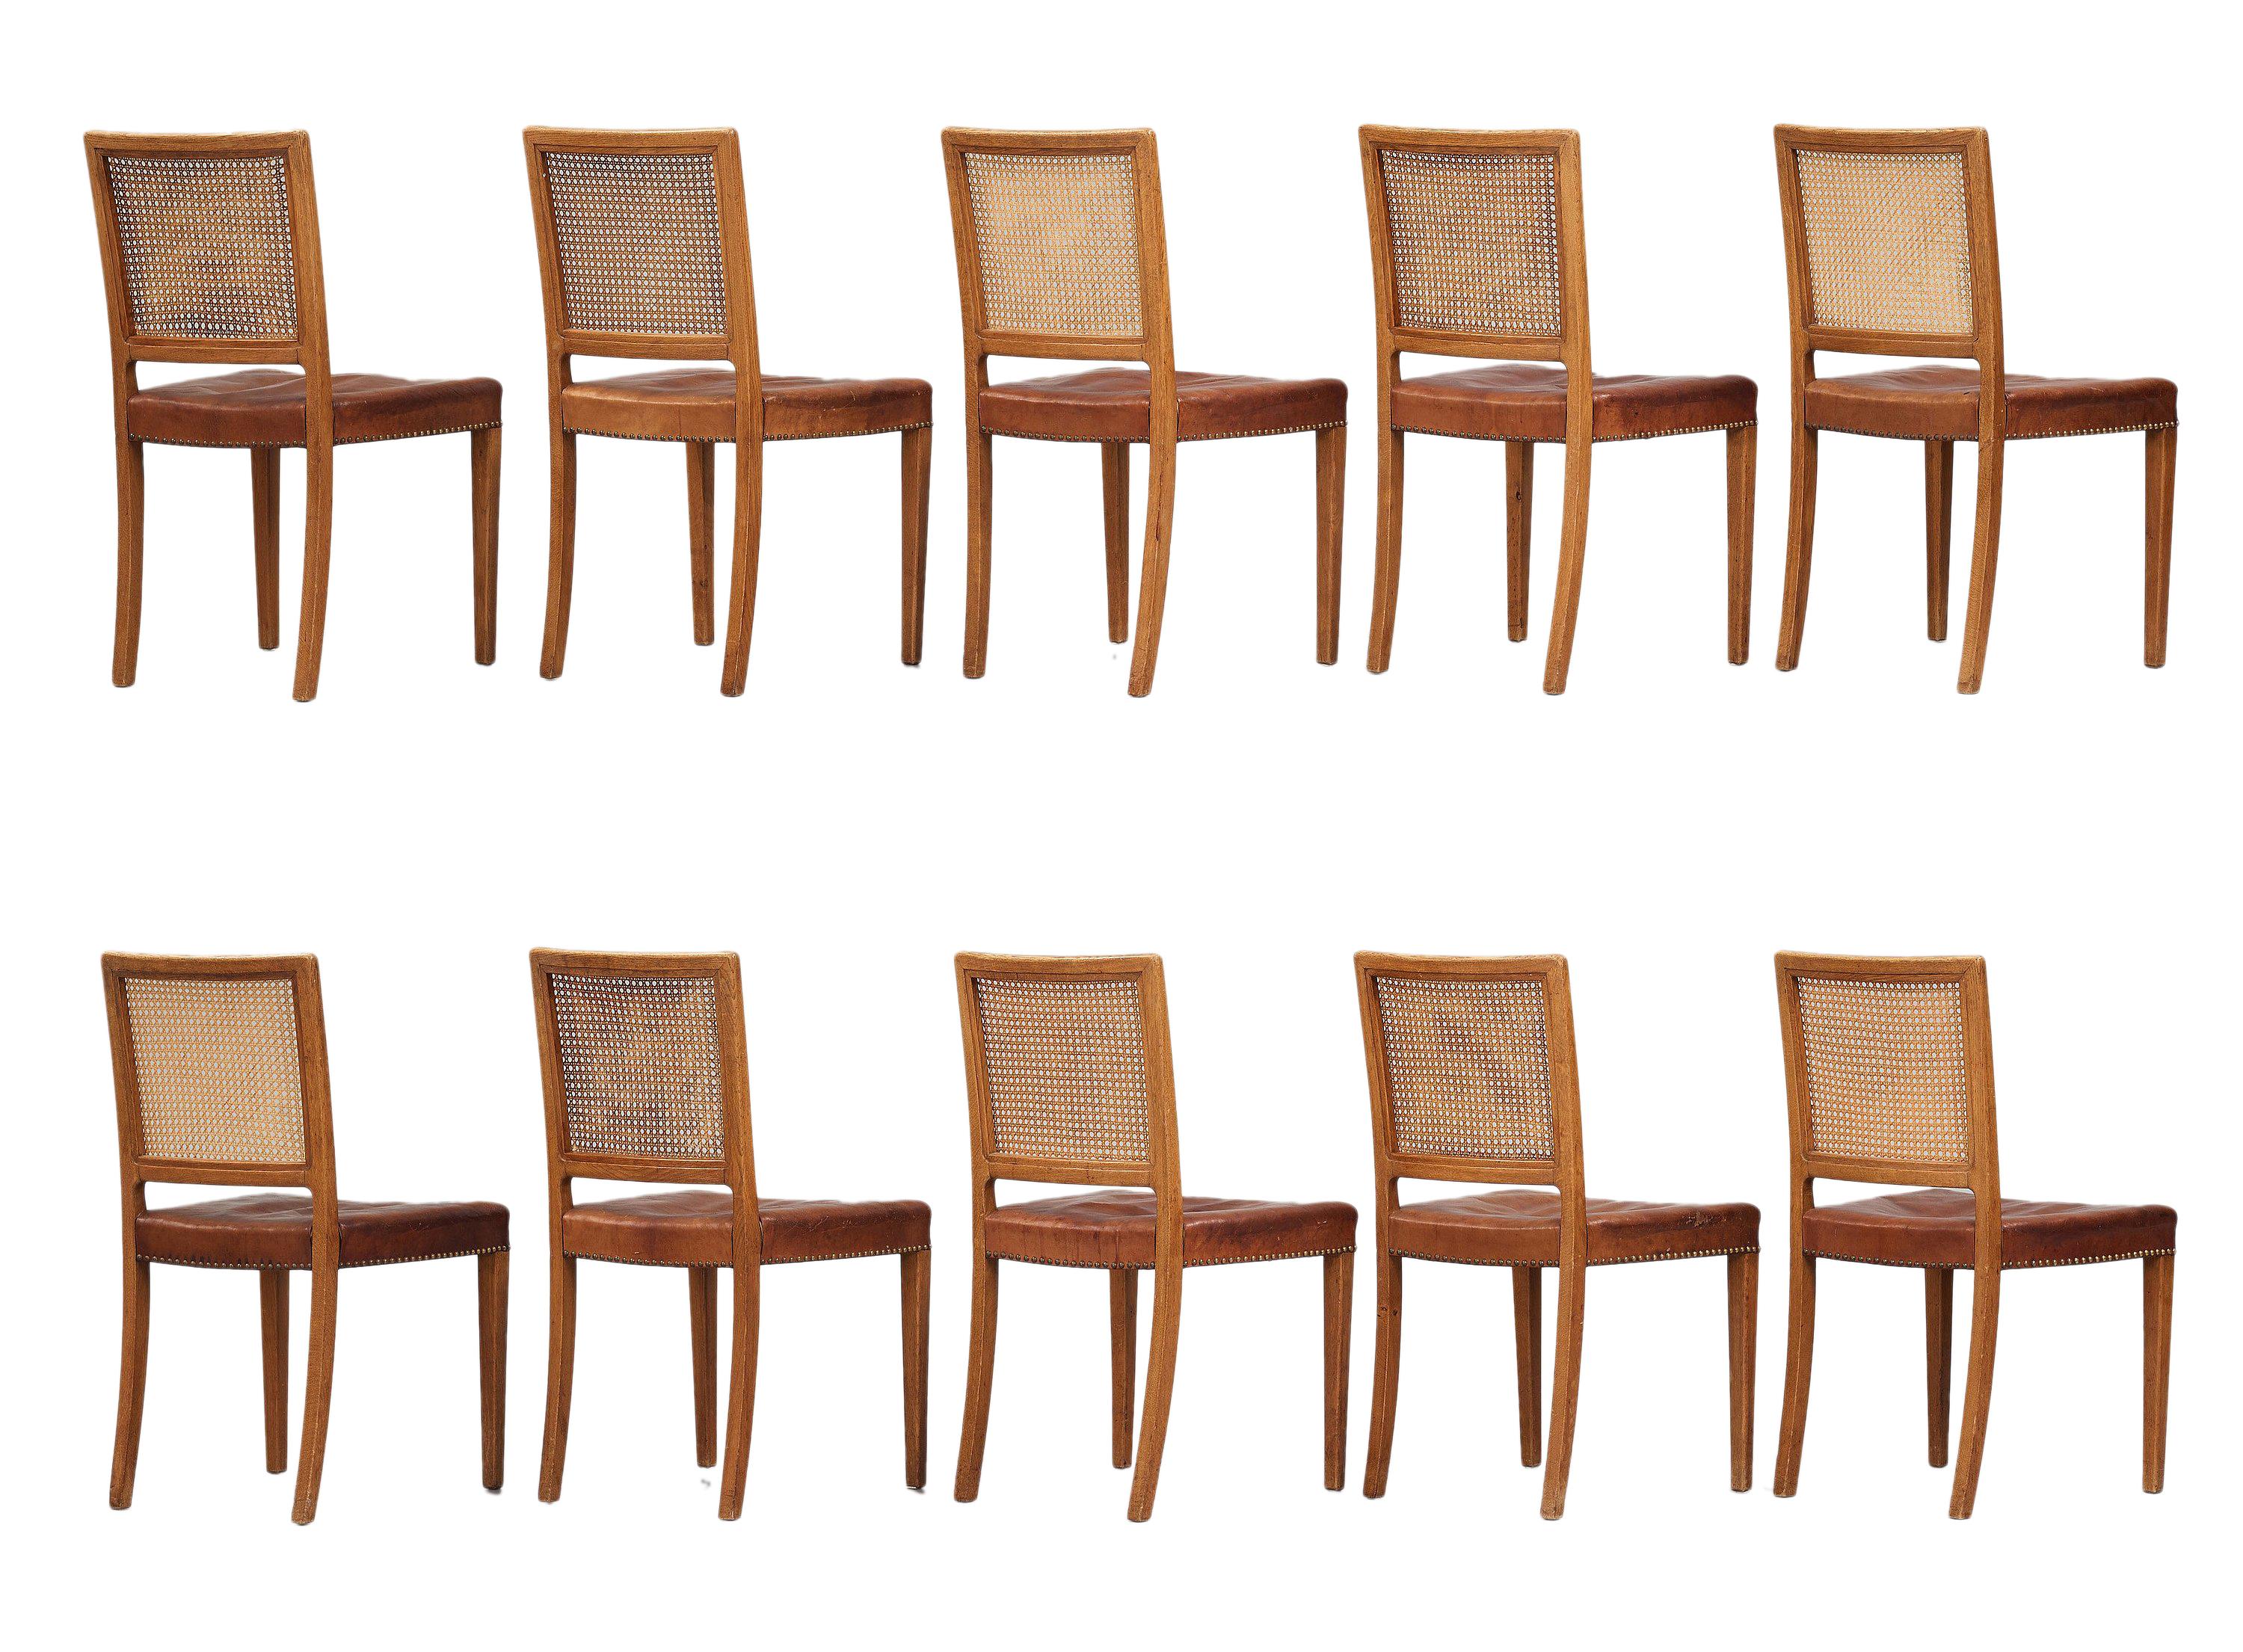 Mid-20th Century Erik Wørts Set of 12 Dining Chairs in Oak, Cane and Niger Leather, 1945